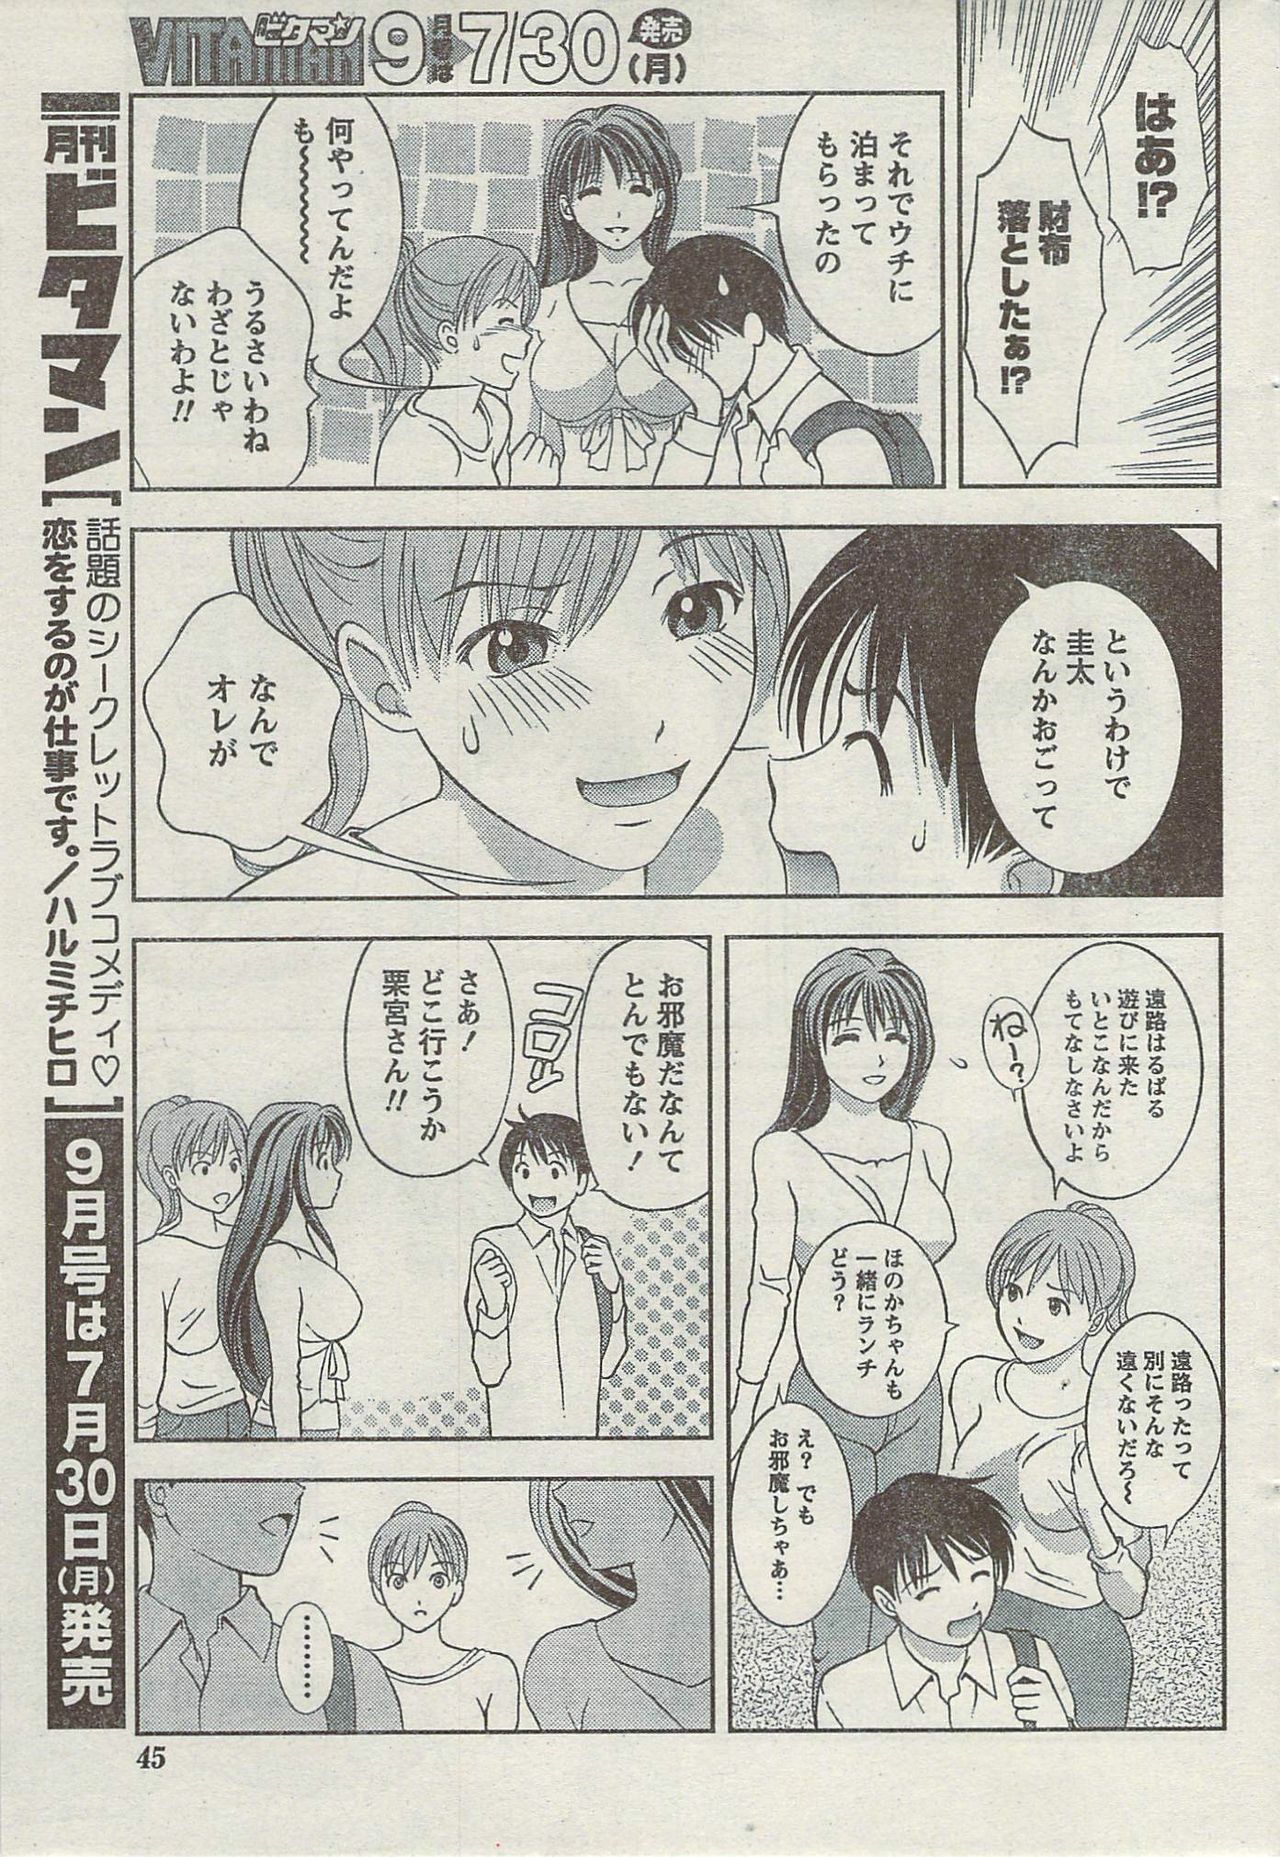 Monthly Vitaman 2007-08 page 45 full